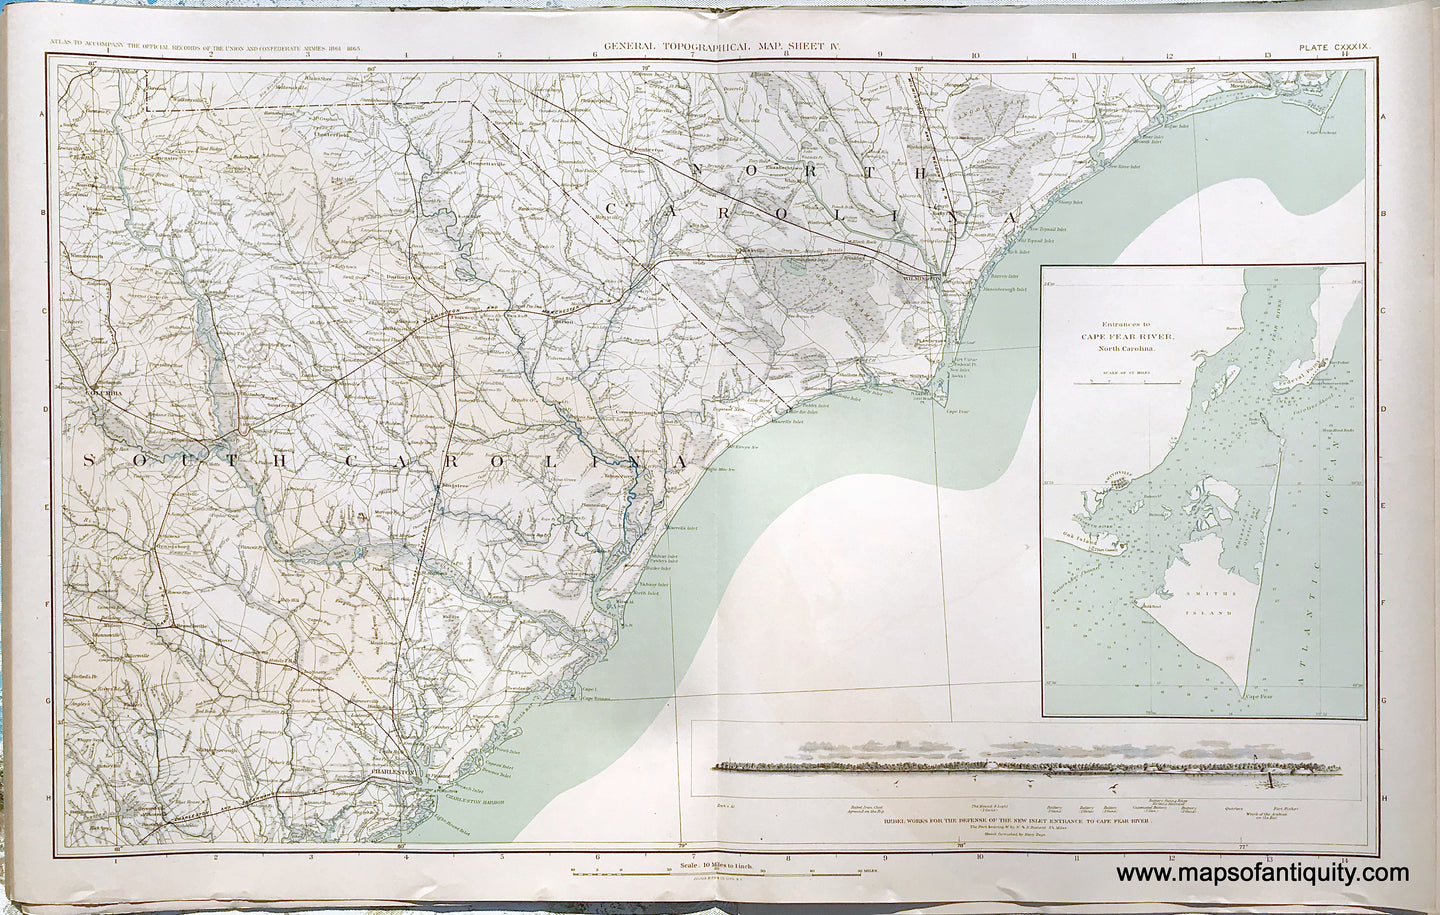 Antique-Lithograph-Print-Plate-139.-General-Topographical-Map.-Sheet-IV.-Sections-of-North-Carolina-and-South-Carolina.-1894-US-War-Dept.-Civil-War-Civil-War-1800s-19th-century-Maps-of-Antiquity